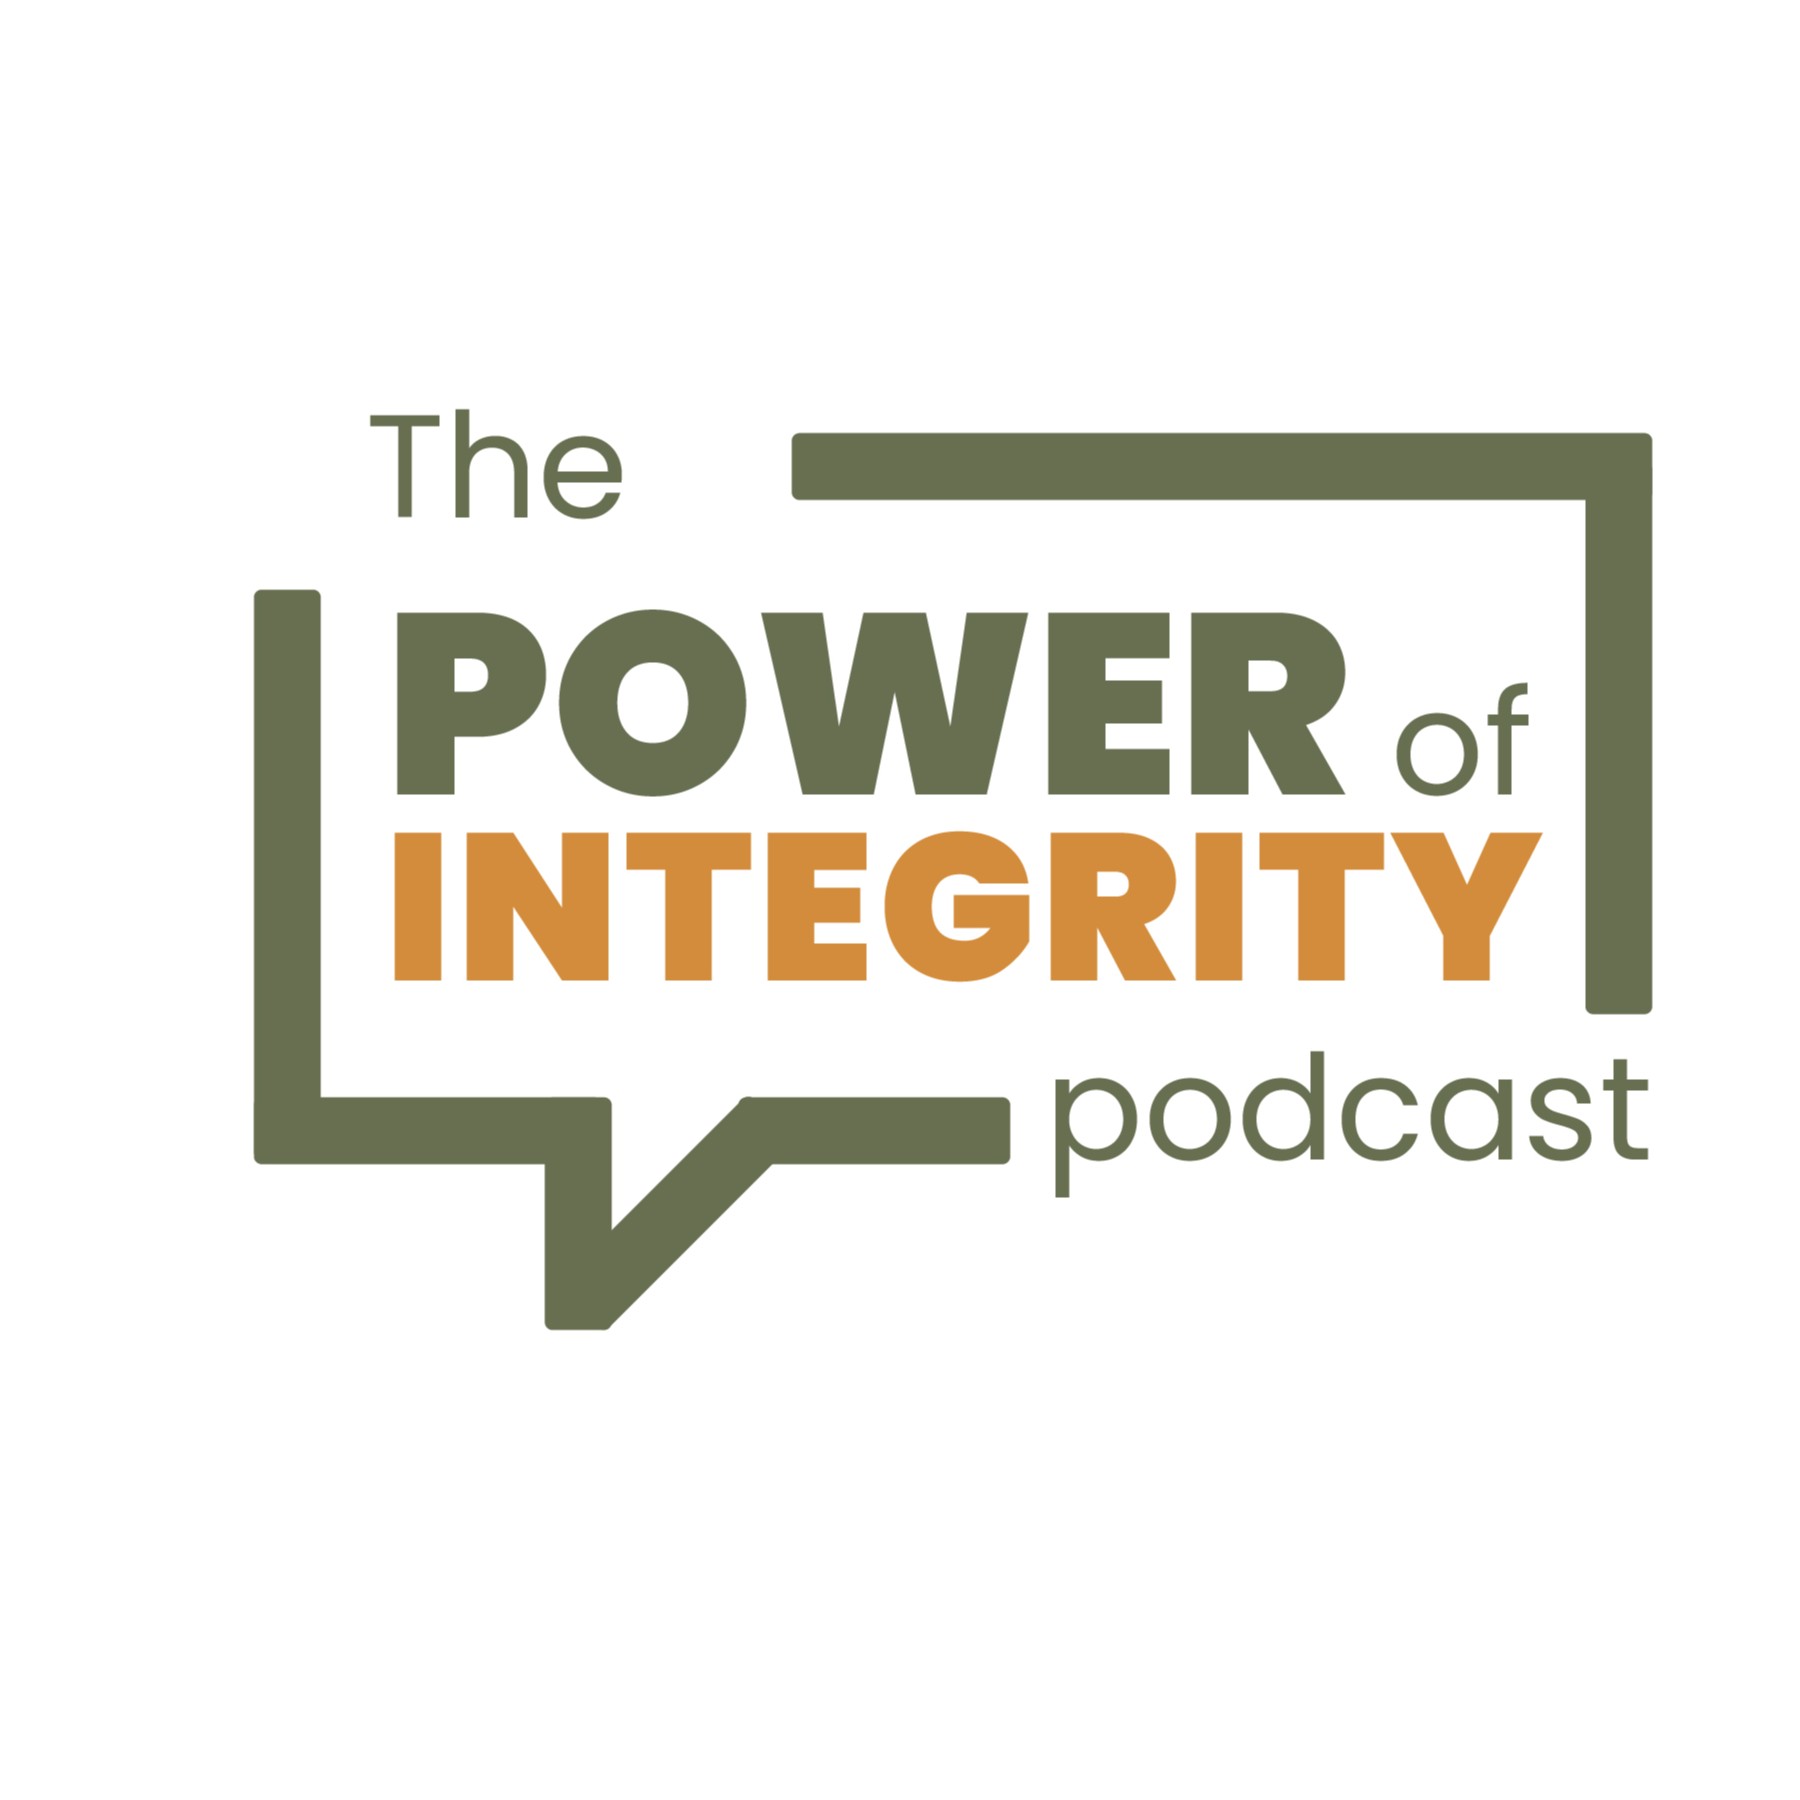 The Power of Integrity Podcast